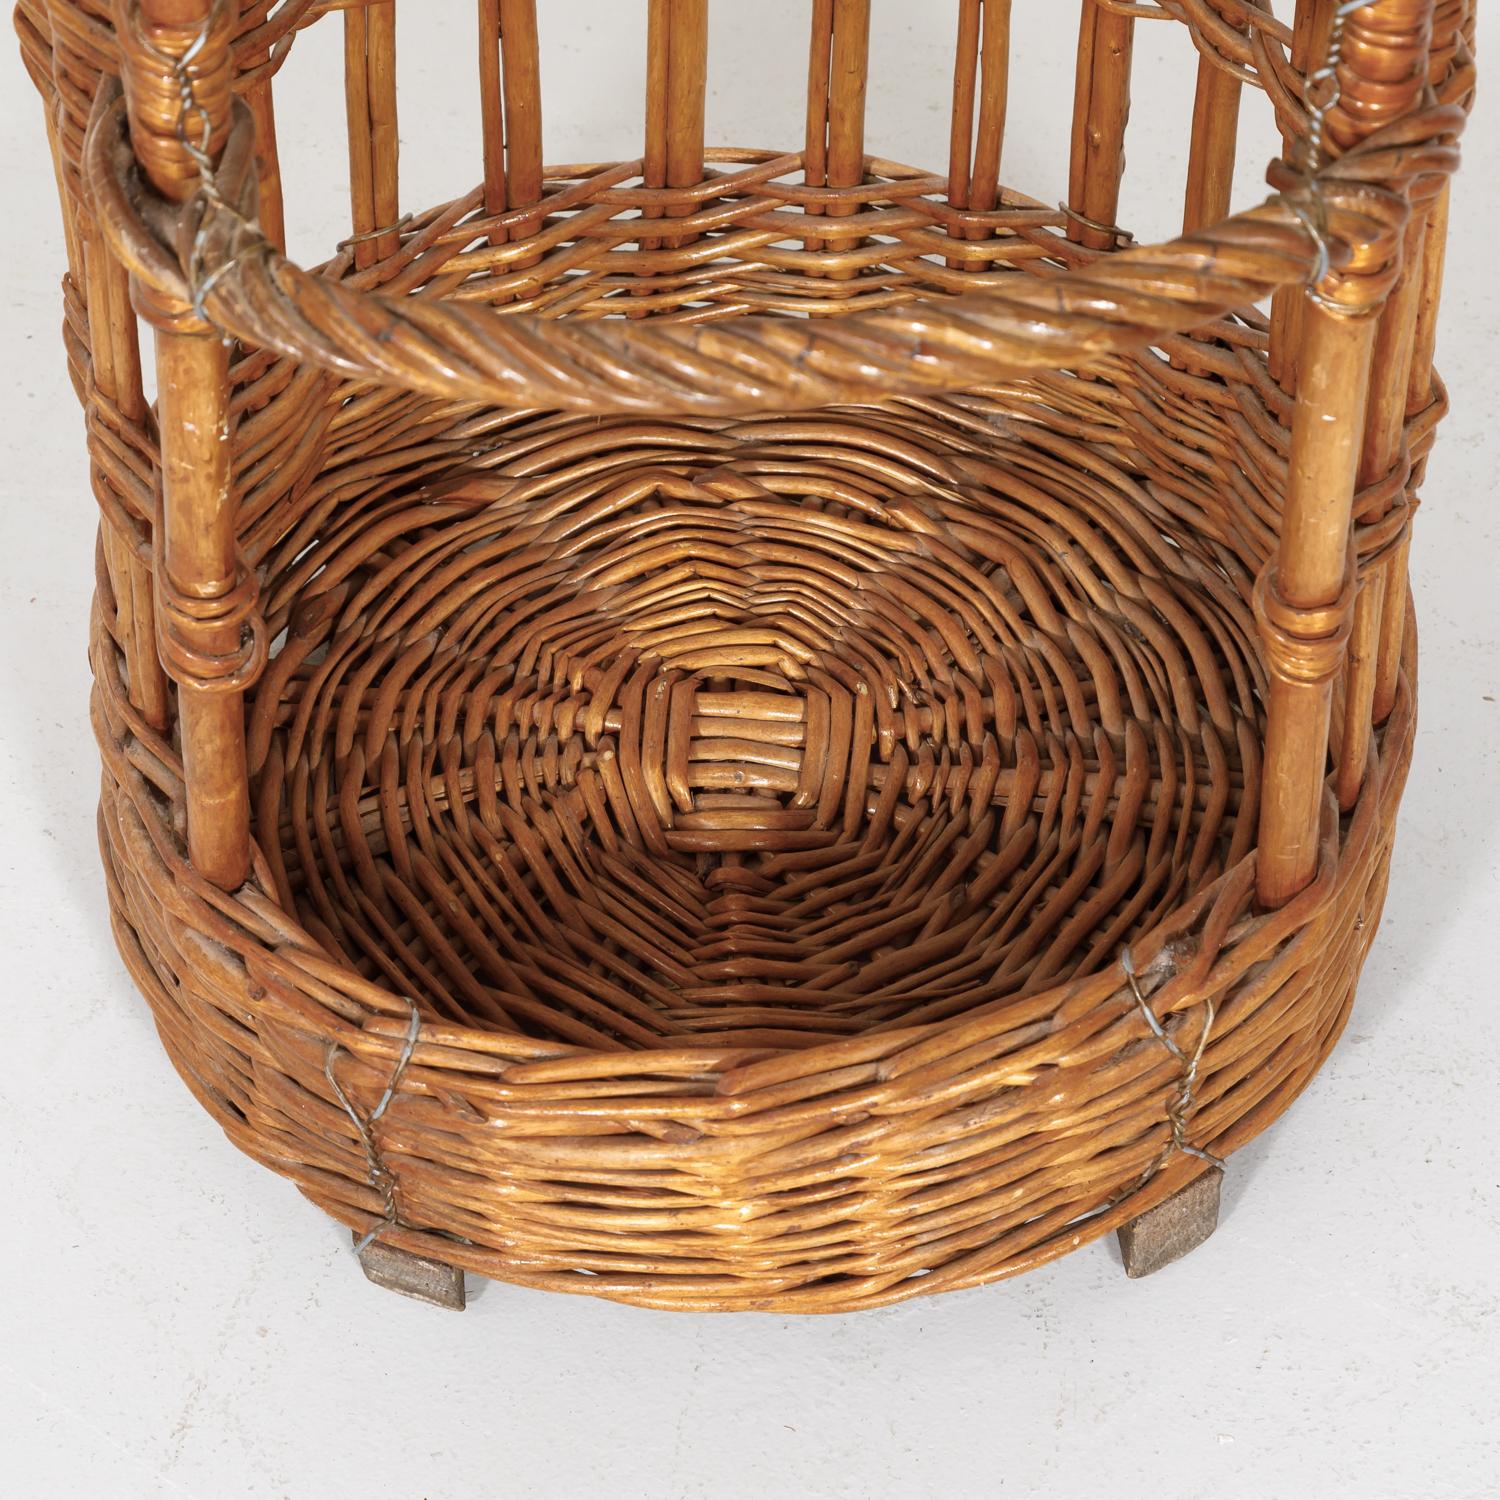 Early 20th Century Large Open-Sided French Standing Willow Baguette Basket from Boulangerie